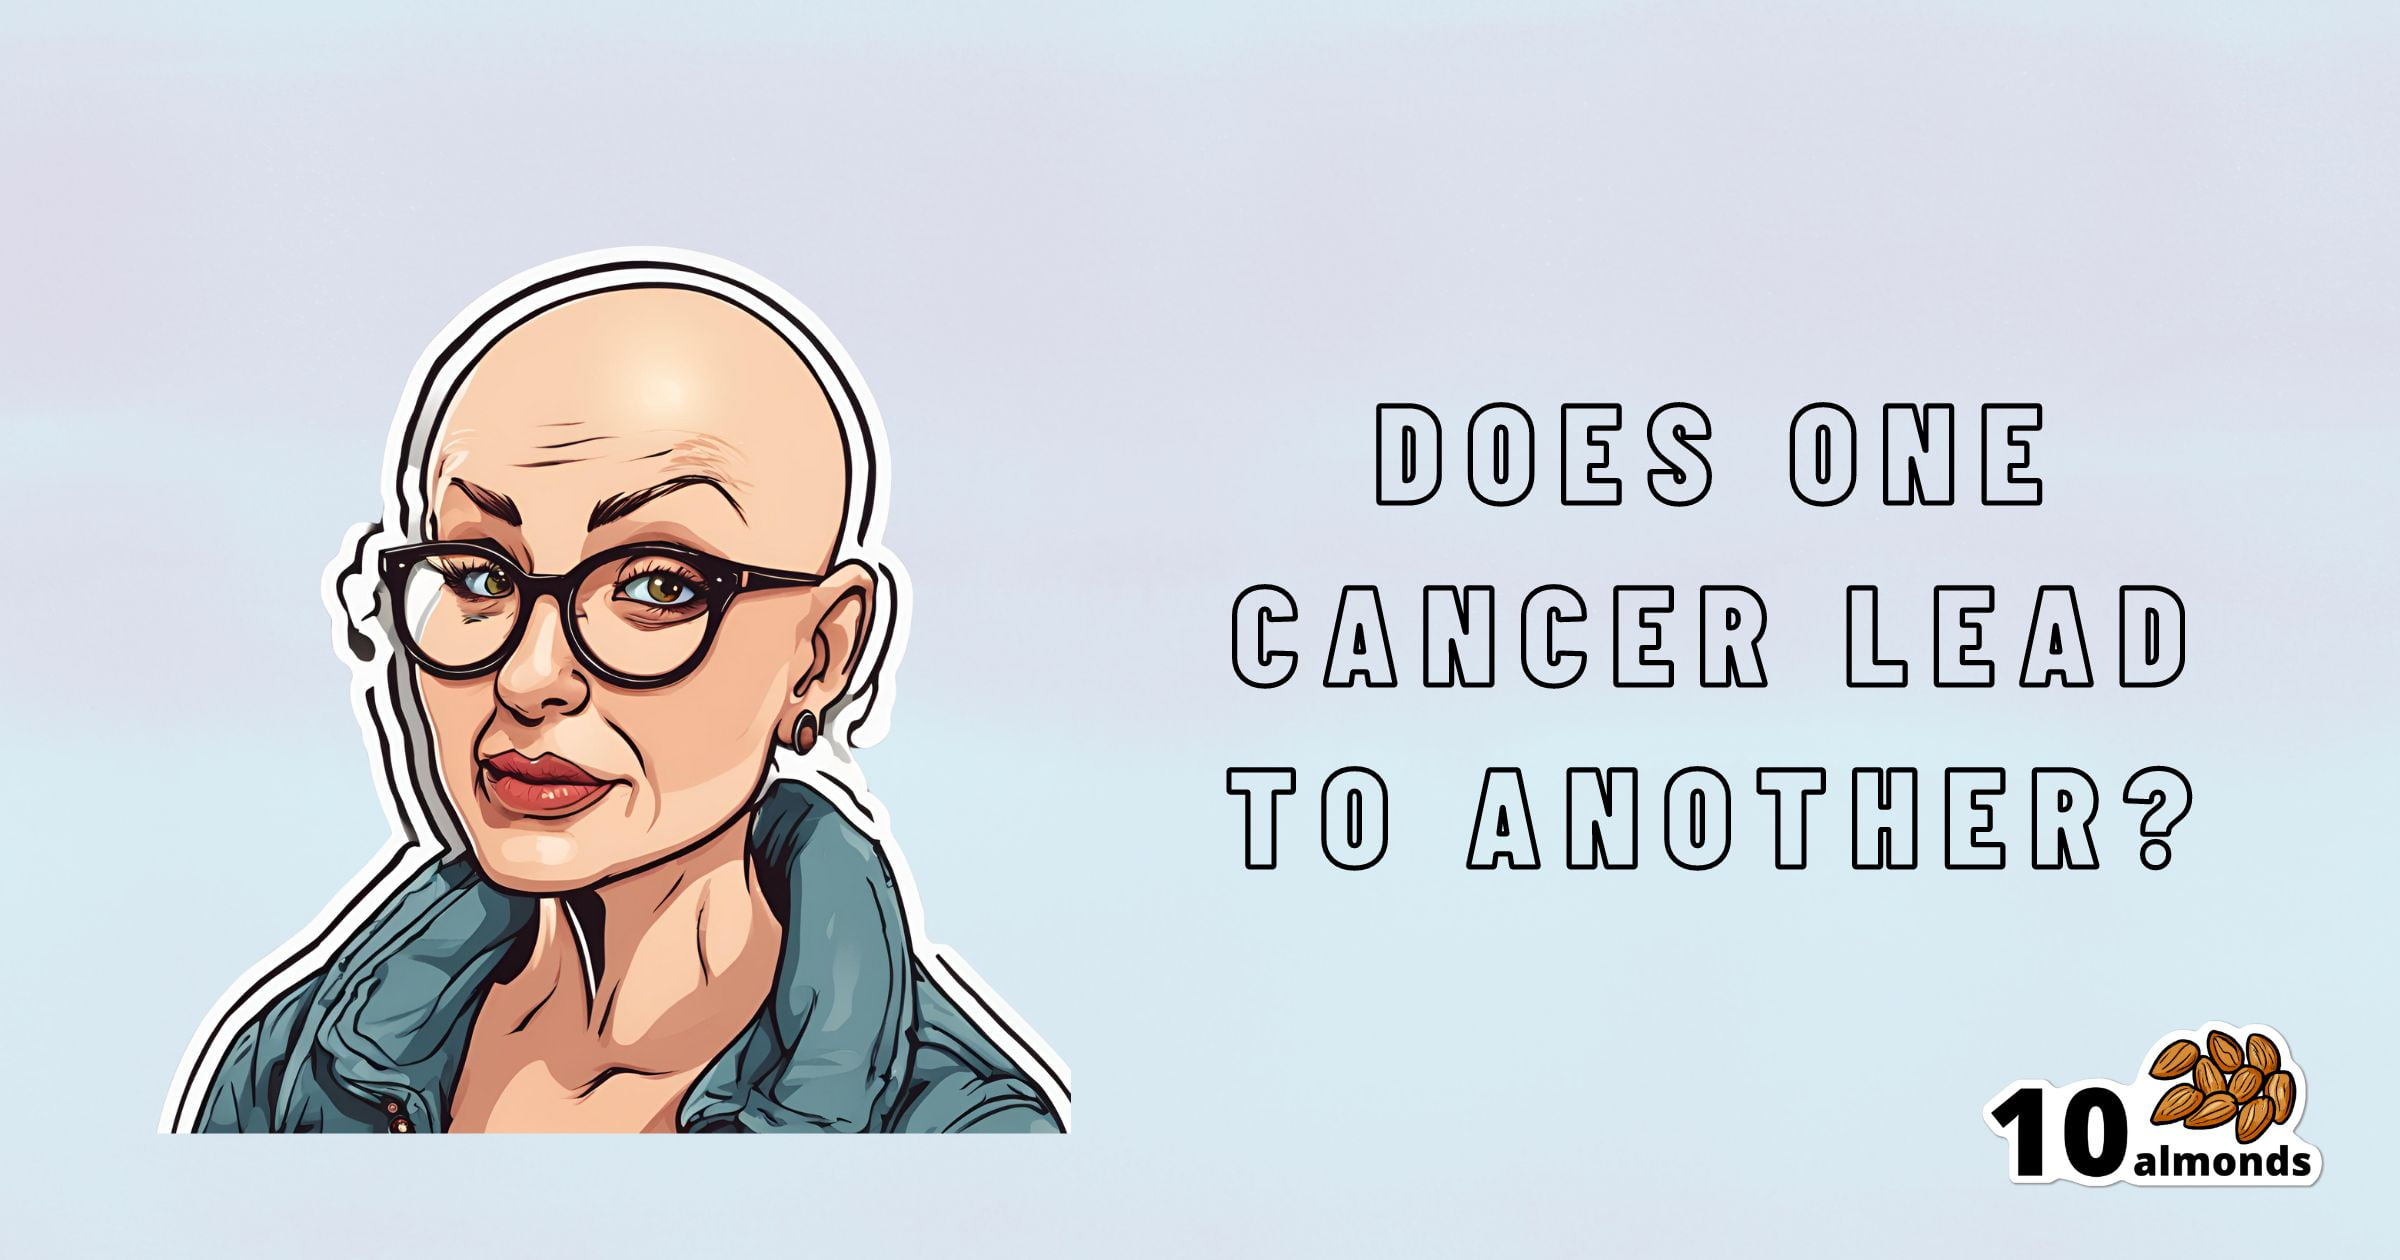 Illustration of a person with glasses and bald head, wearing a jacket, alongside the text "Does one cancer lead to another?" The bottom-right corner has an icon of 10 almonds indicating a series brand. The background is a light gradient, subtly highlighting the concern of multiple cancers and cancer risk.